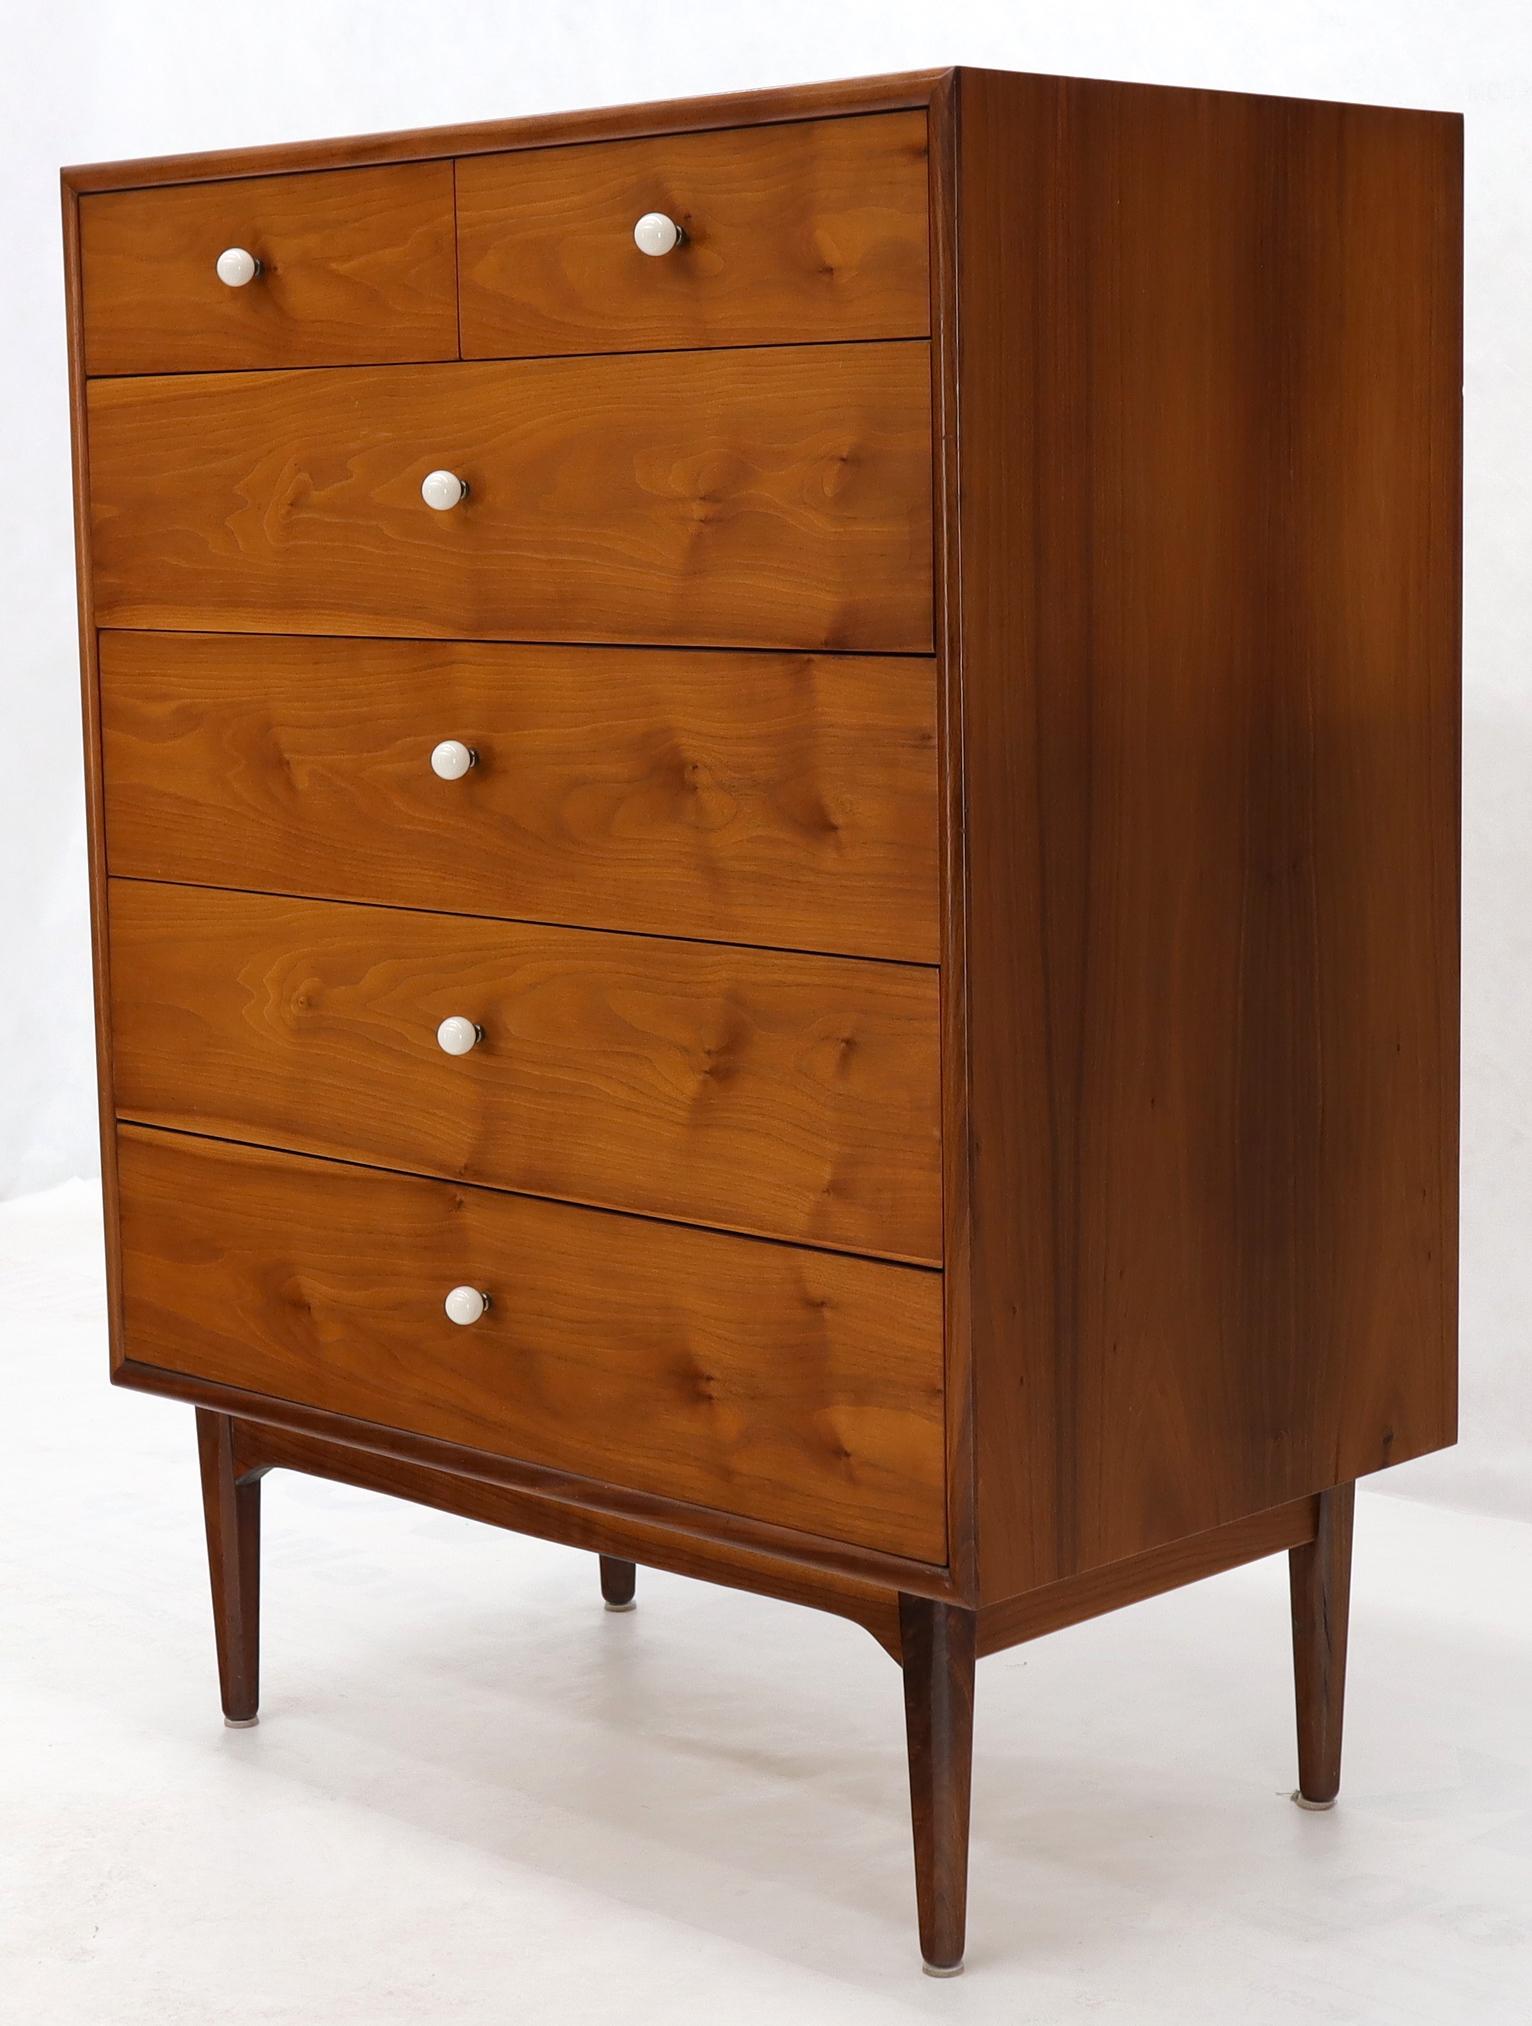 Mid-Century Modern 5 drawers high chest dresser cabinet by Drexel in very clean original condition with beautiful walnut wood grain.